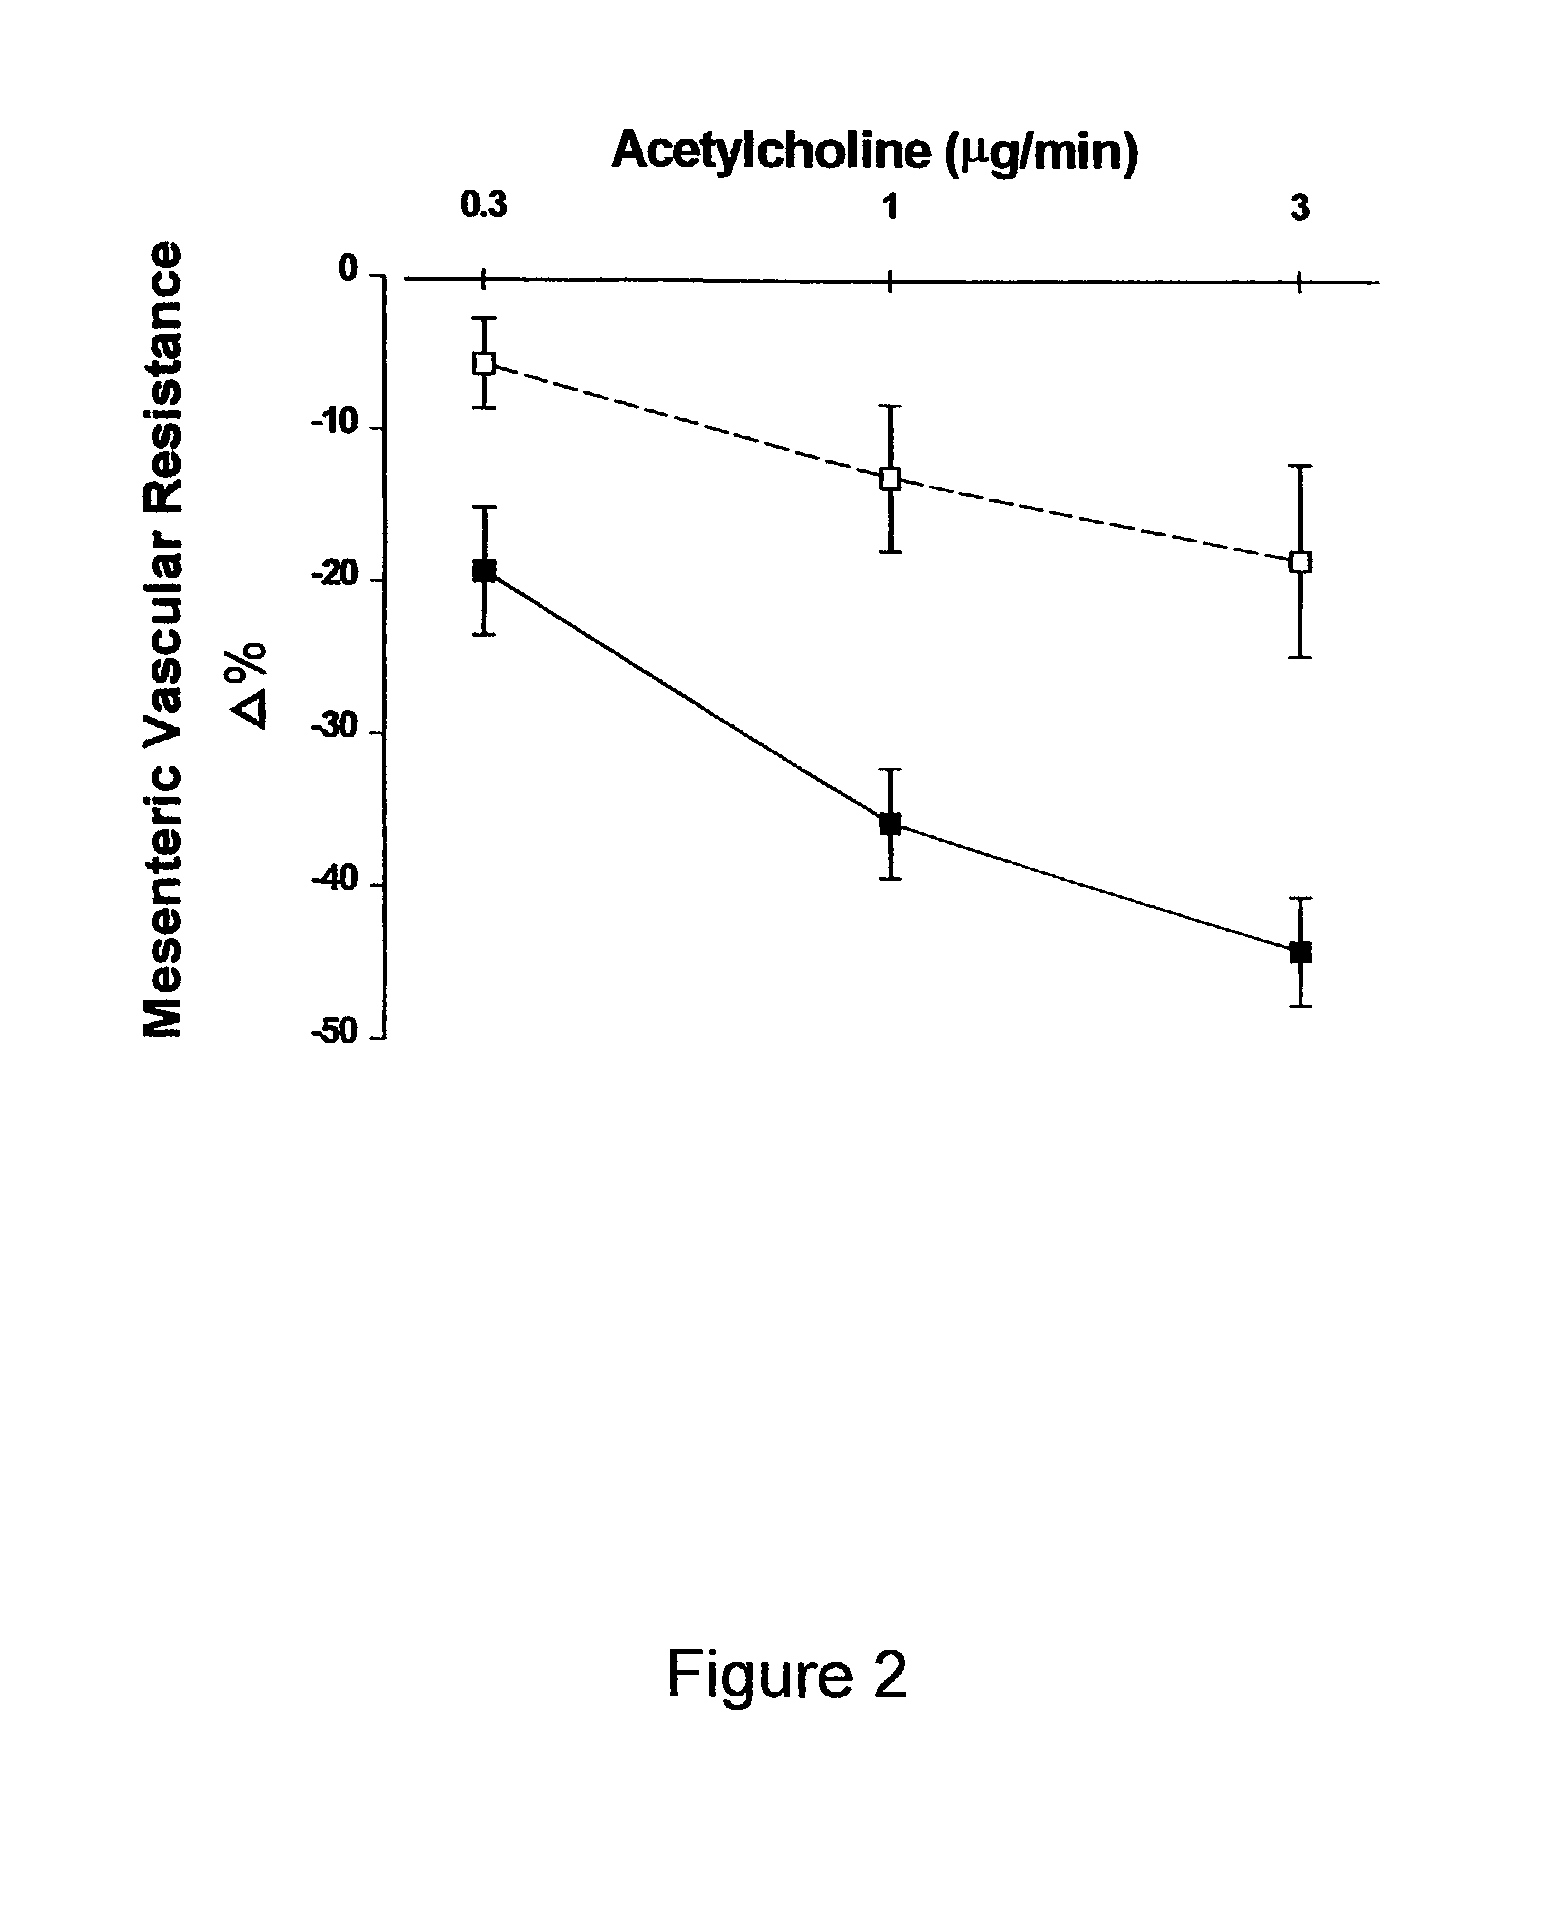 Administration of estradiol metabolites for the treatment or prevention of obesity, metabolic syndrome, diabetes, and vascular and renal disorders